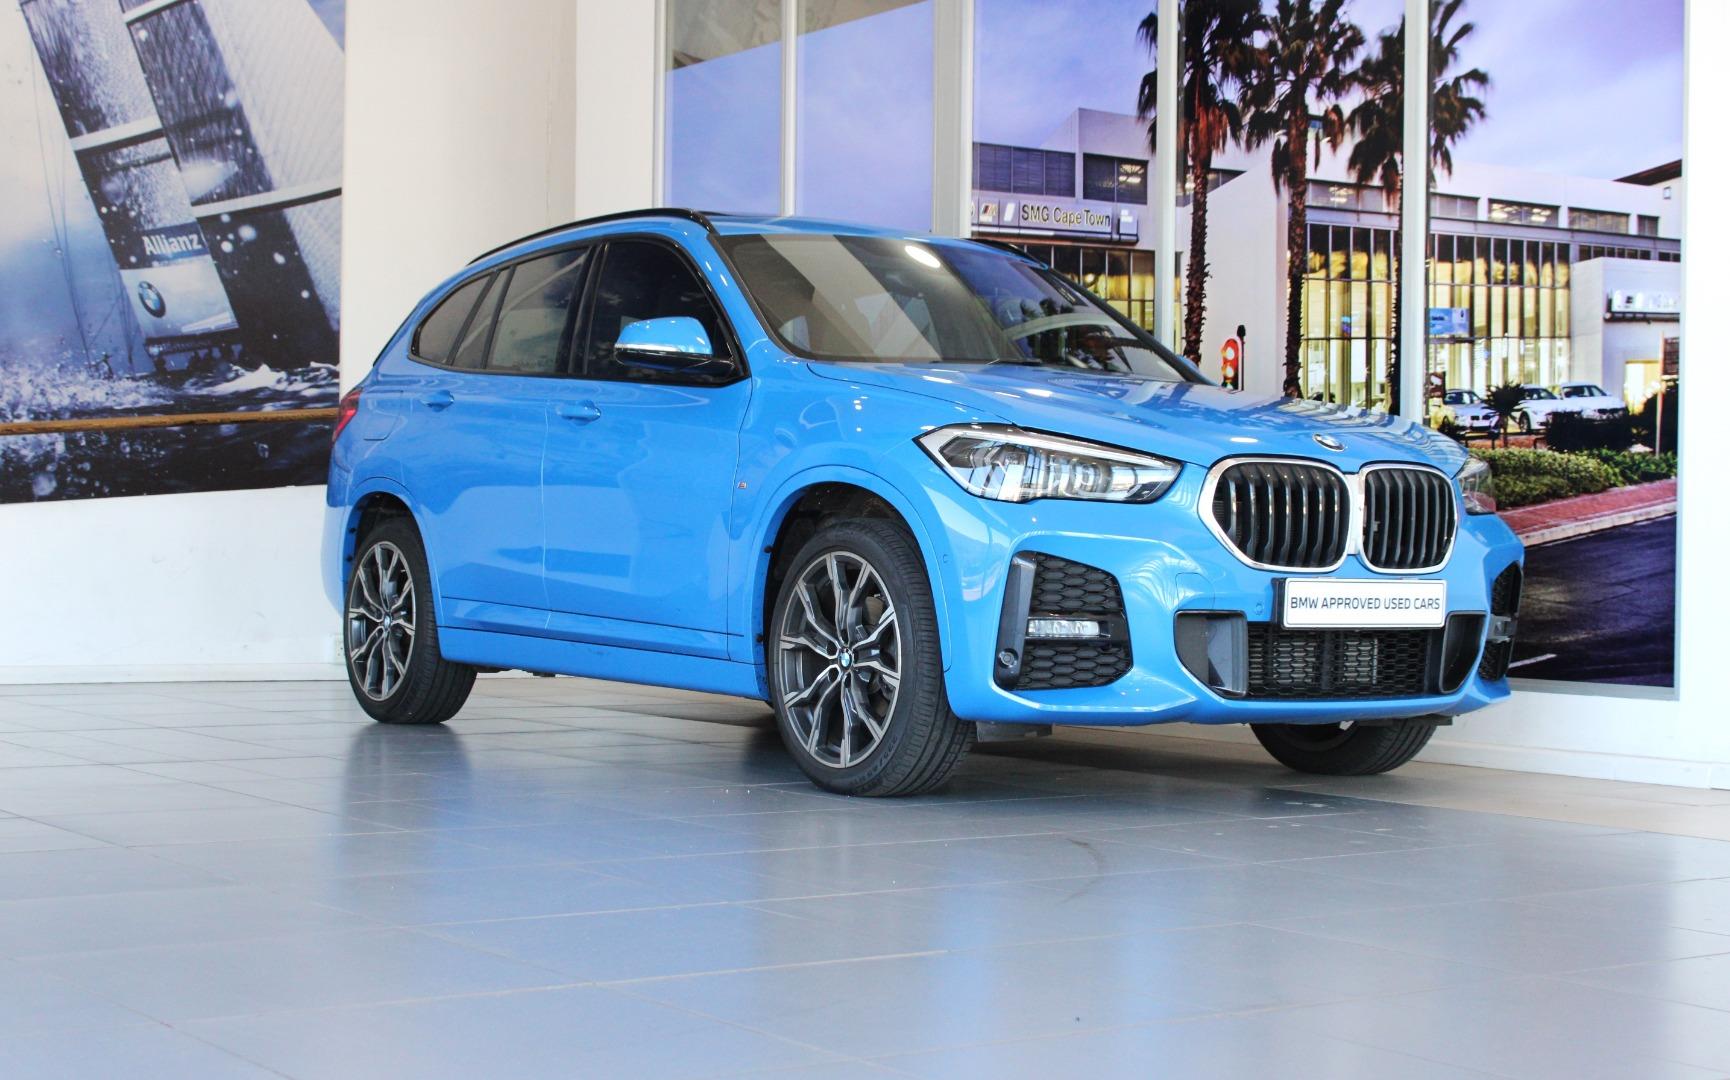 2020 BMW X1 sDRIVE18d M-SPORT AT (F48)  for sale - SMG12|USED|115340